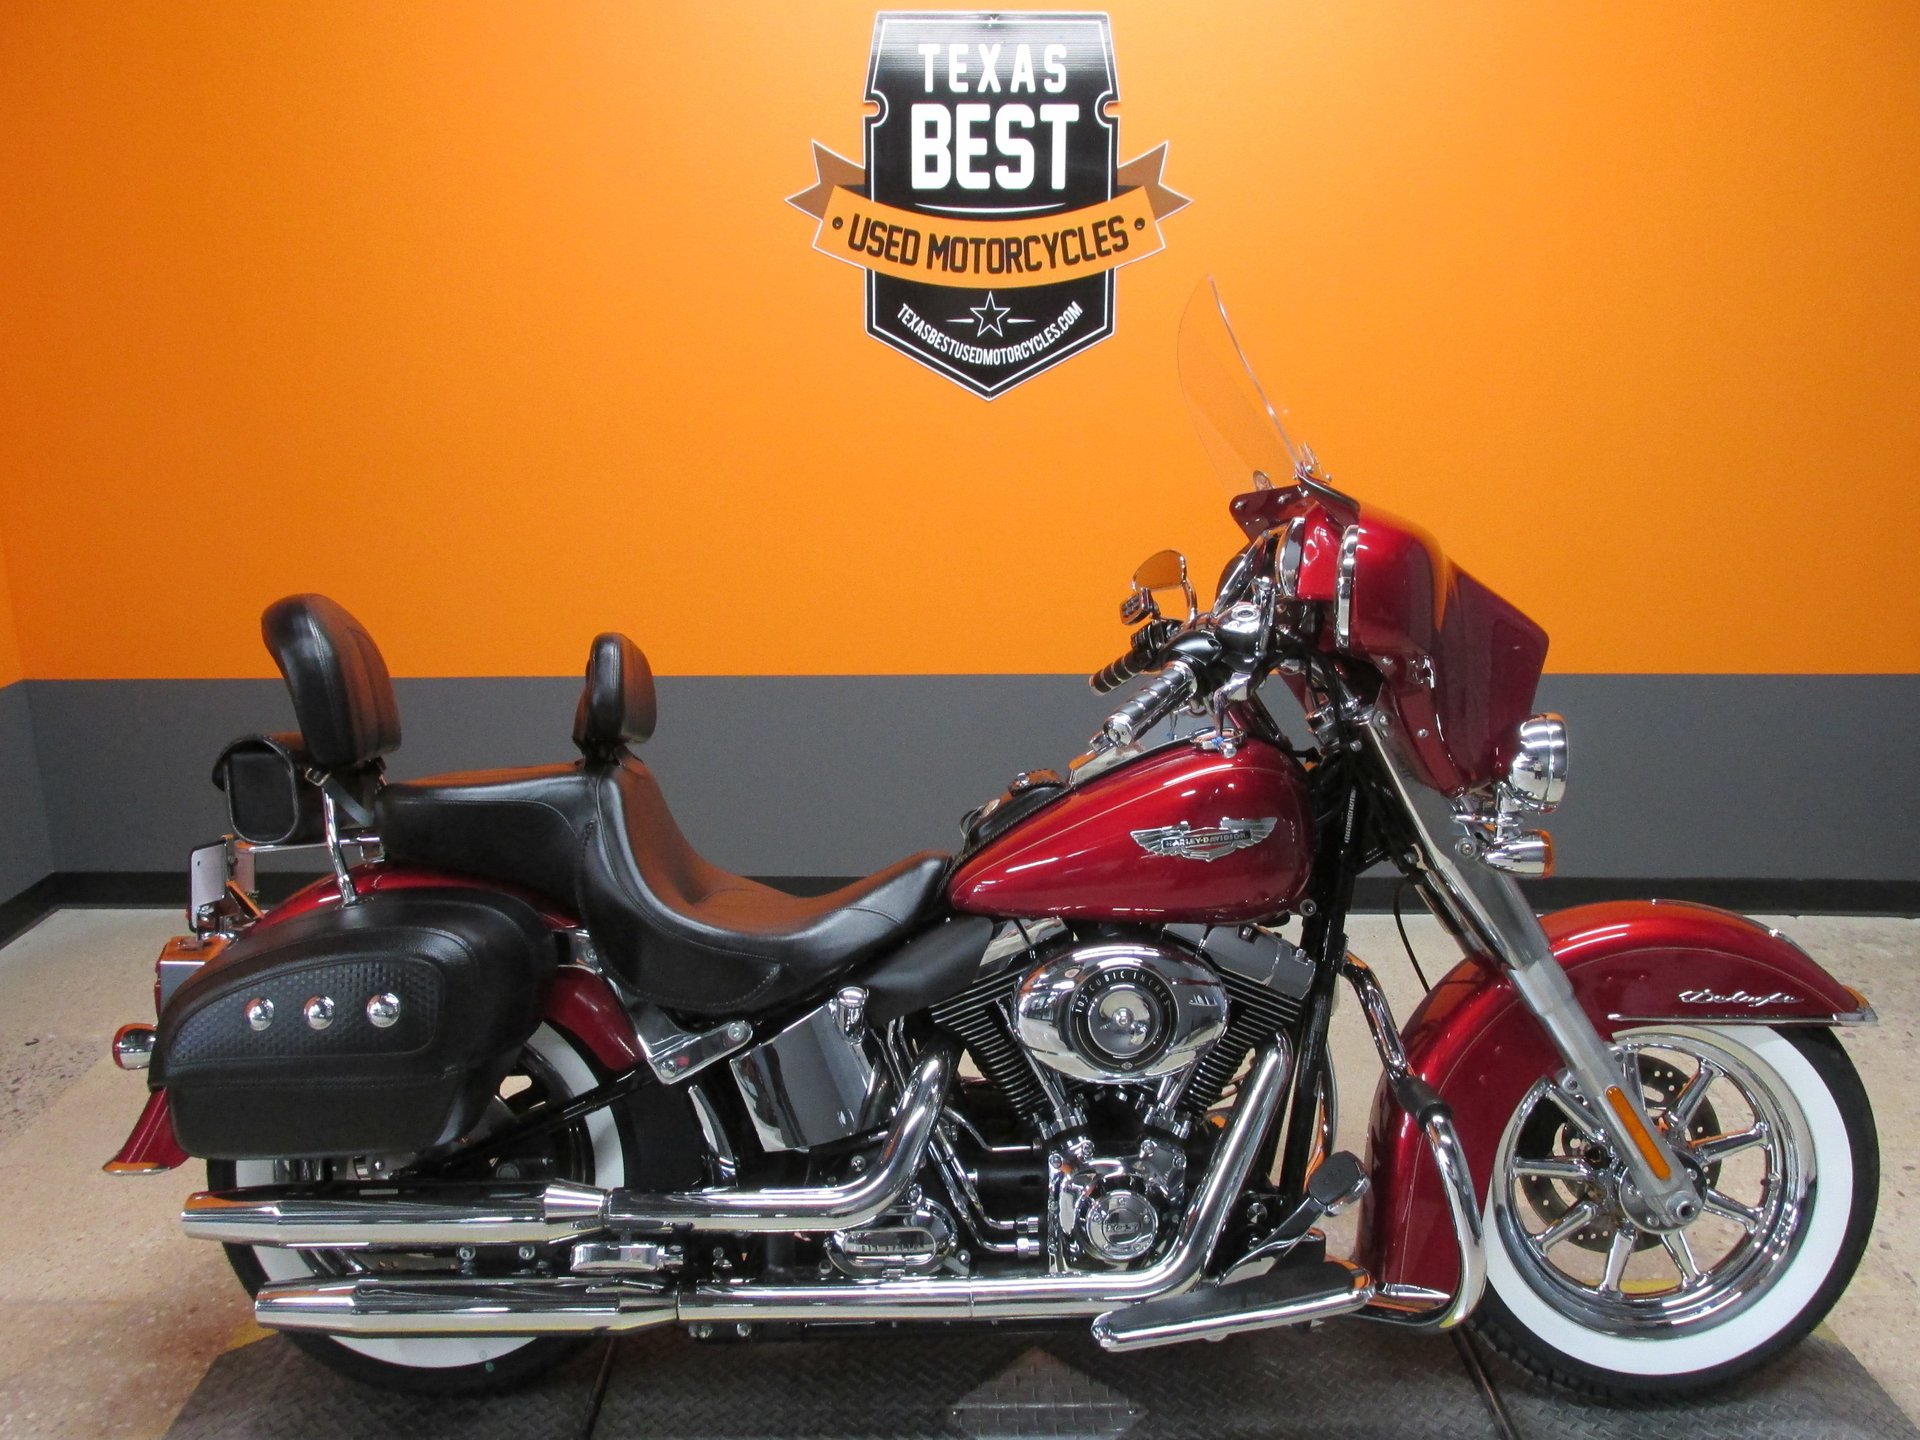 2013 Harley-Davidson Softail Deluxe | American Motorcycle Trading Company -  Used Harley Davidson Motorcycles